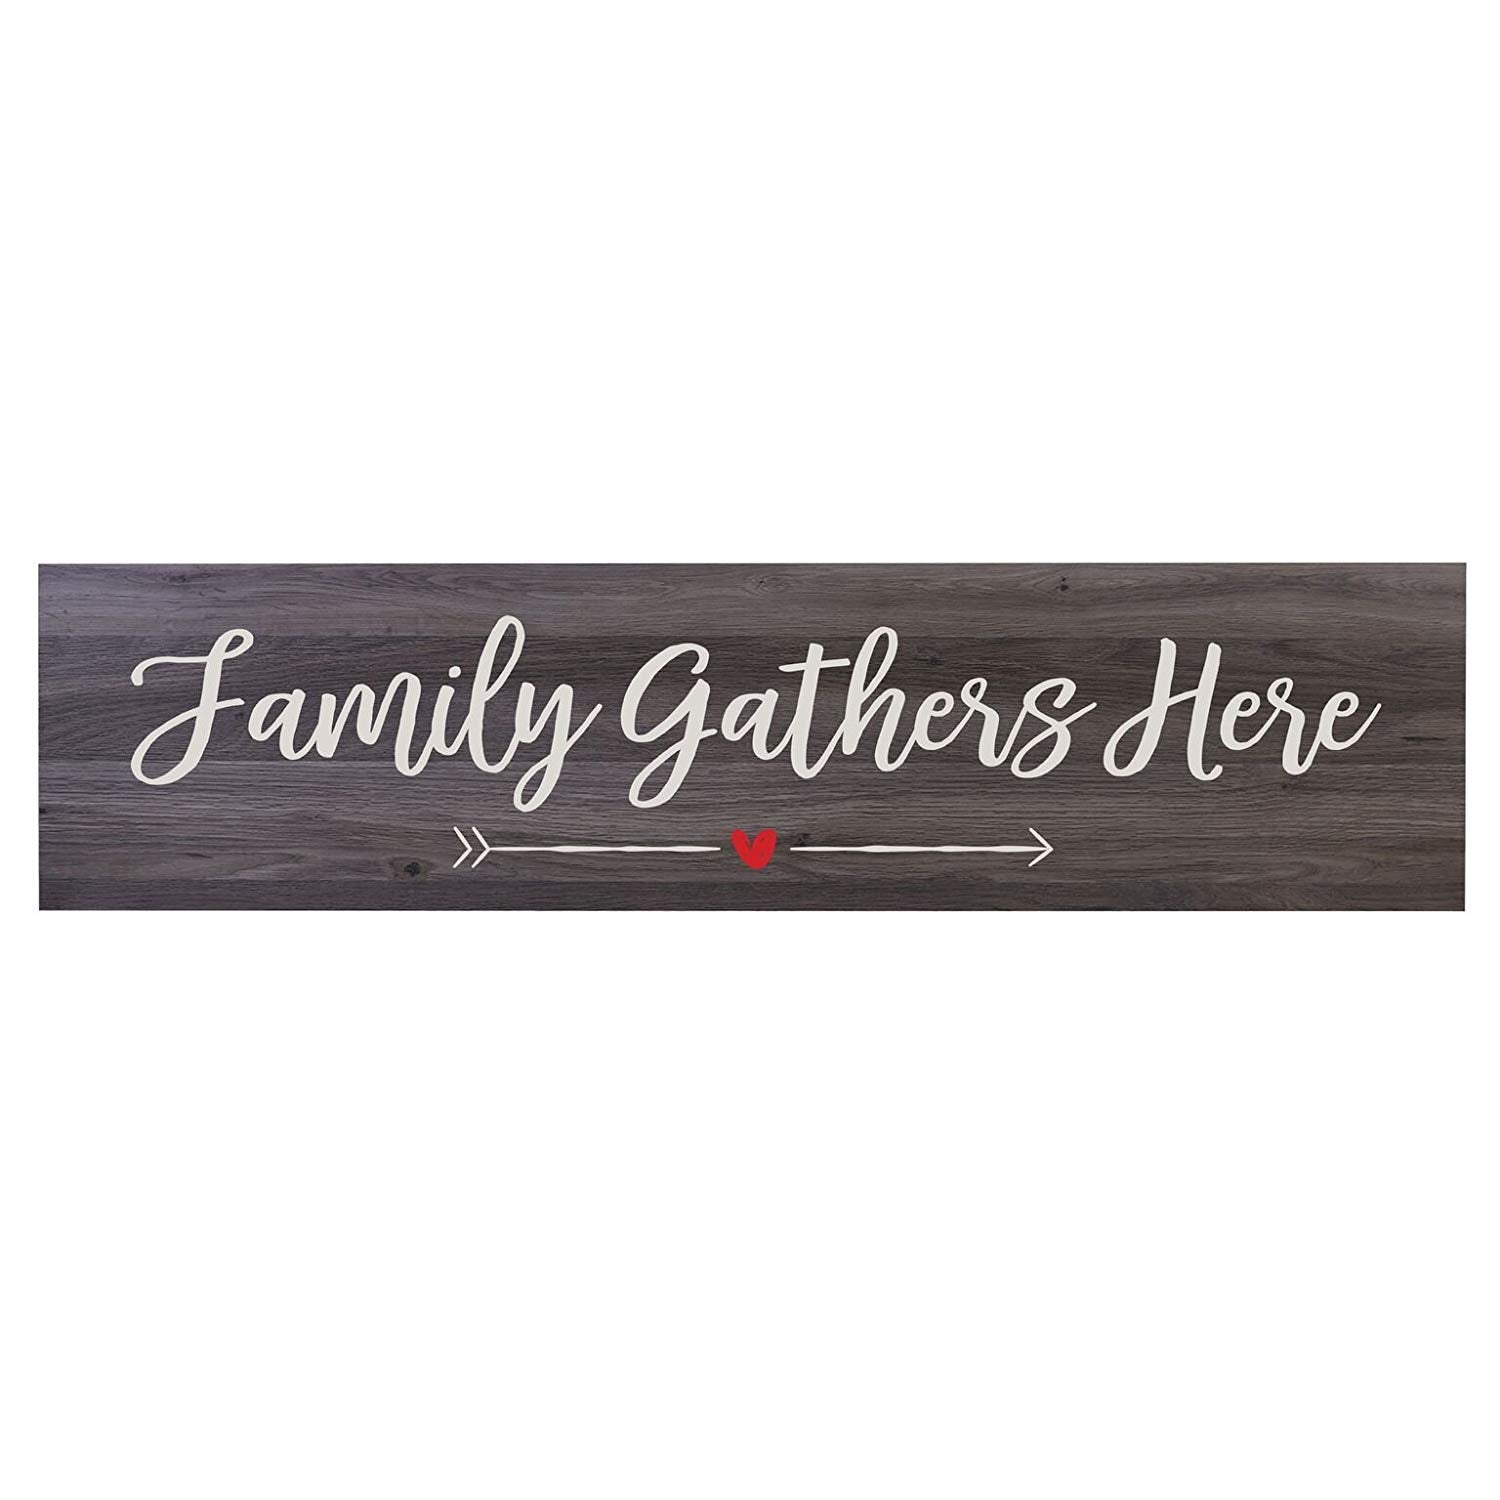 LifeSong Milestones Family's Gather Here wall art Decorative Sign for Living Room Entryway Kitchen - LifeSong Milestones